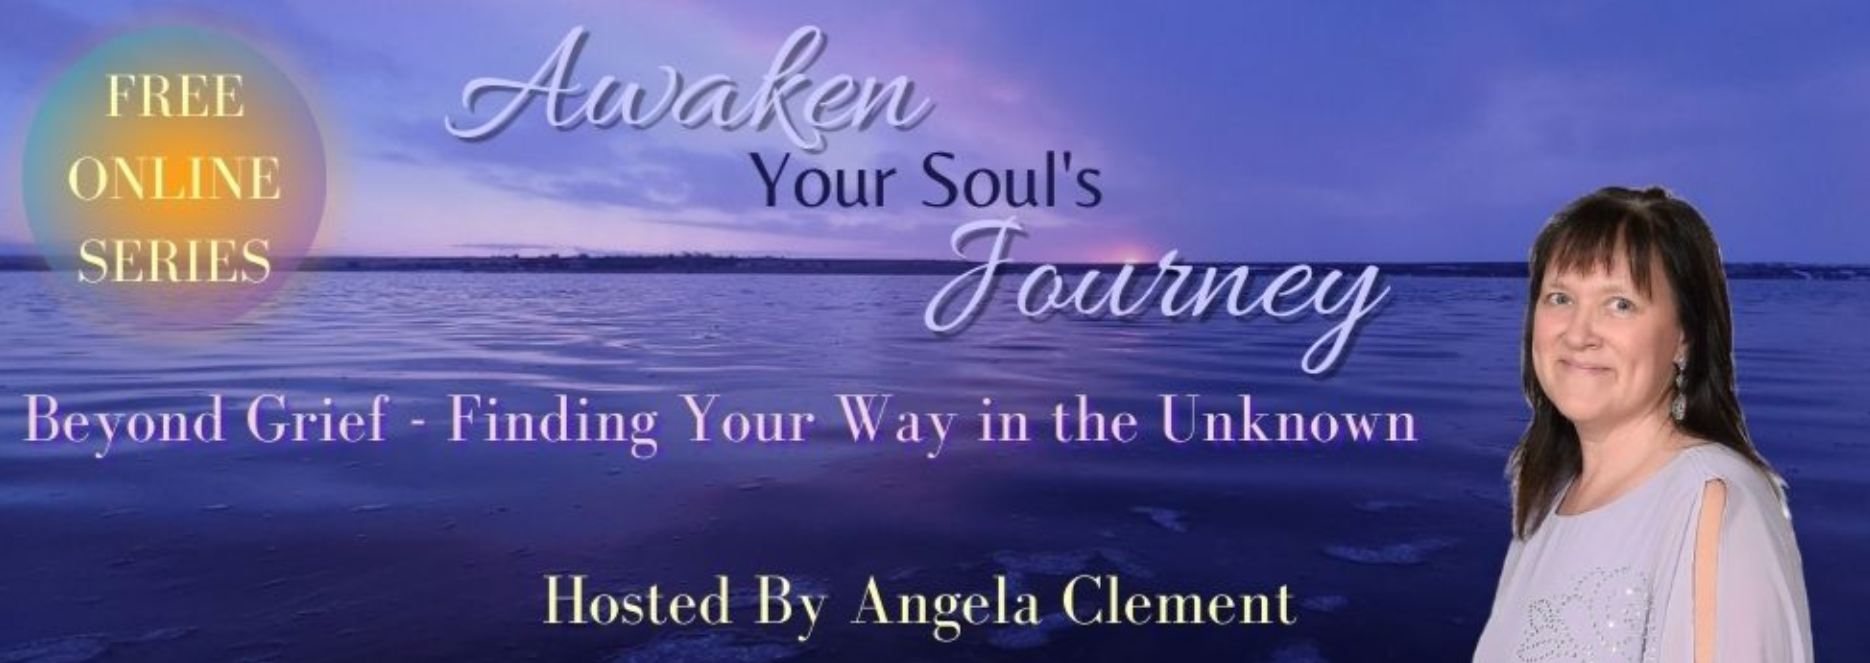 FREE ONLINE SUMMIT: AWAKEN YOUR SOUL’S JOURNEY: BEYOND GRIEF a 100% FREE ONLINE VIRTUAL SERIES